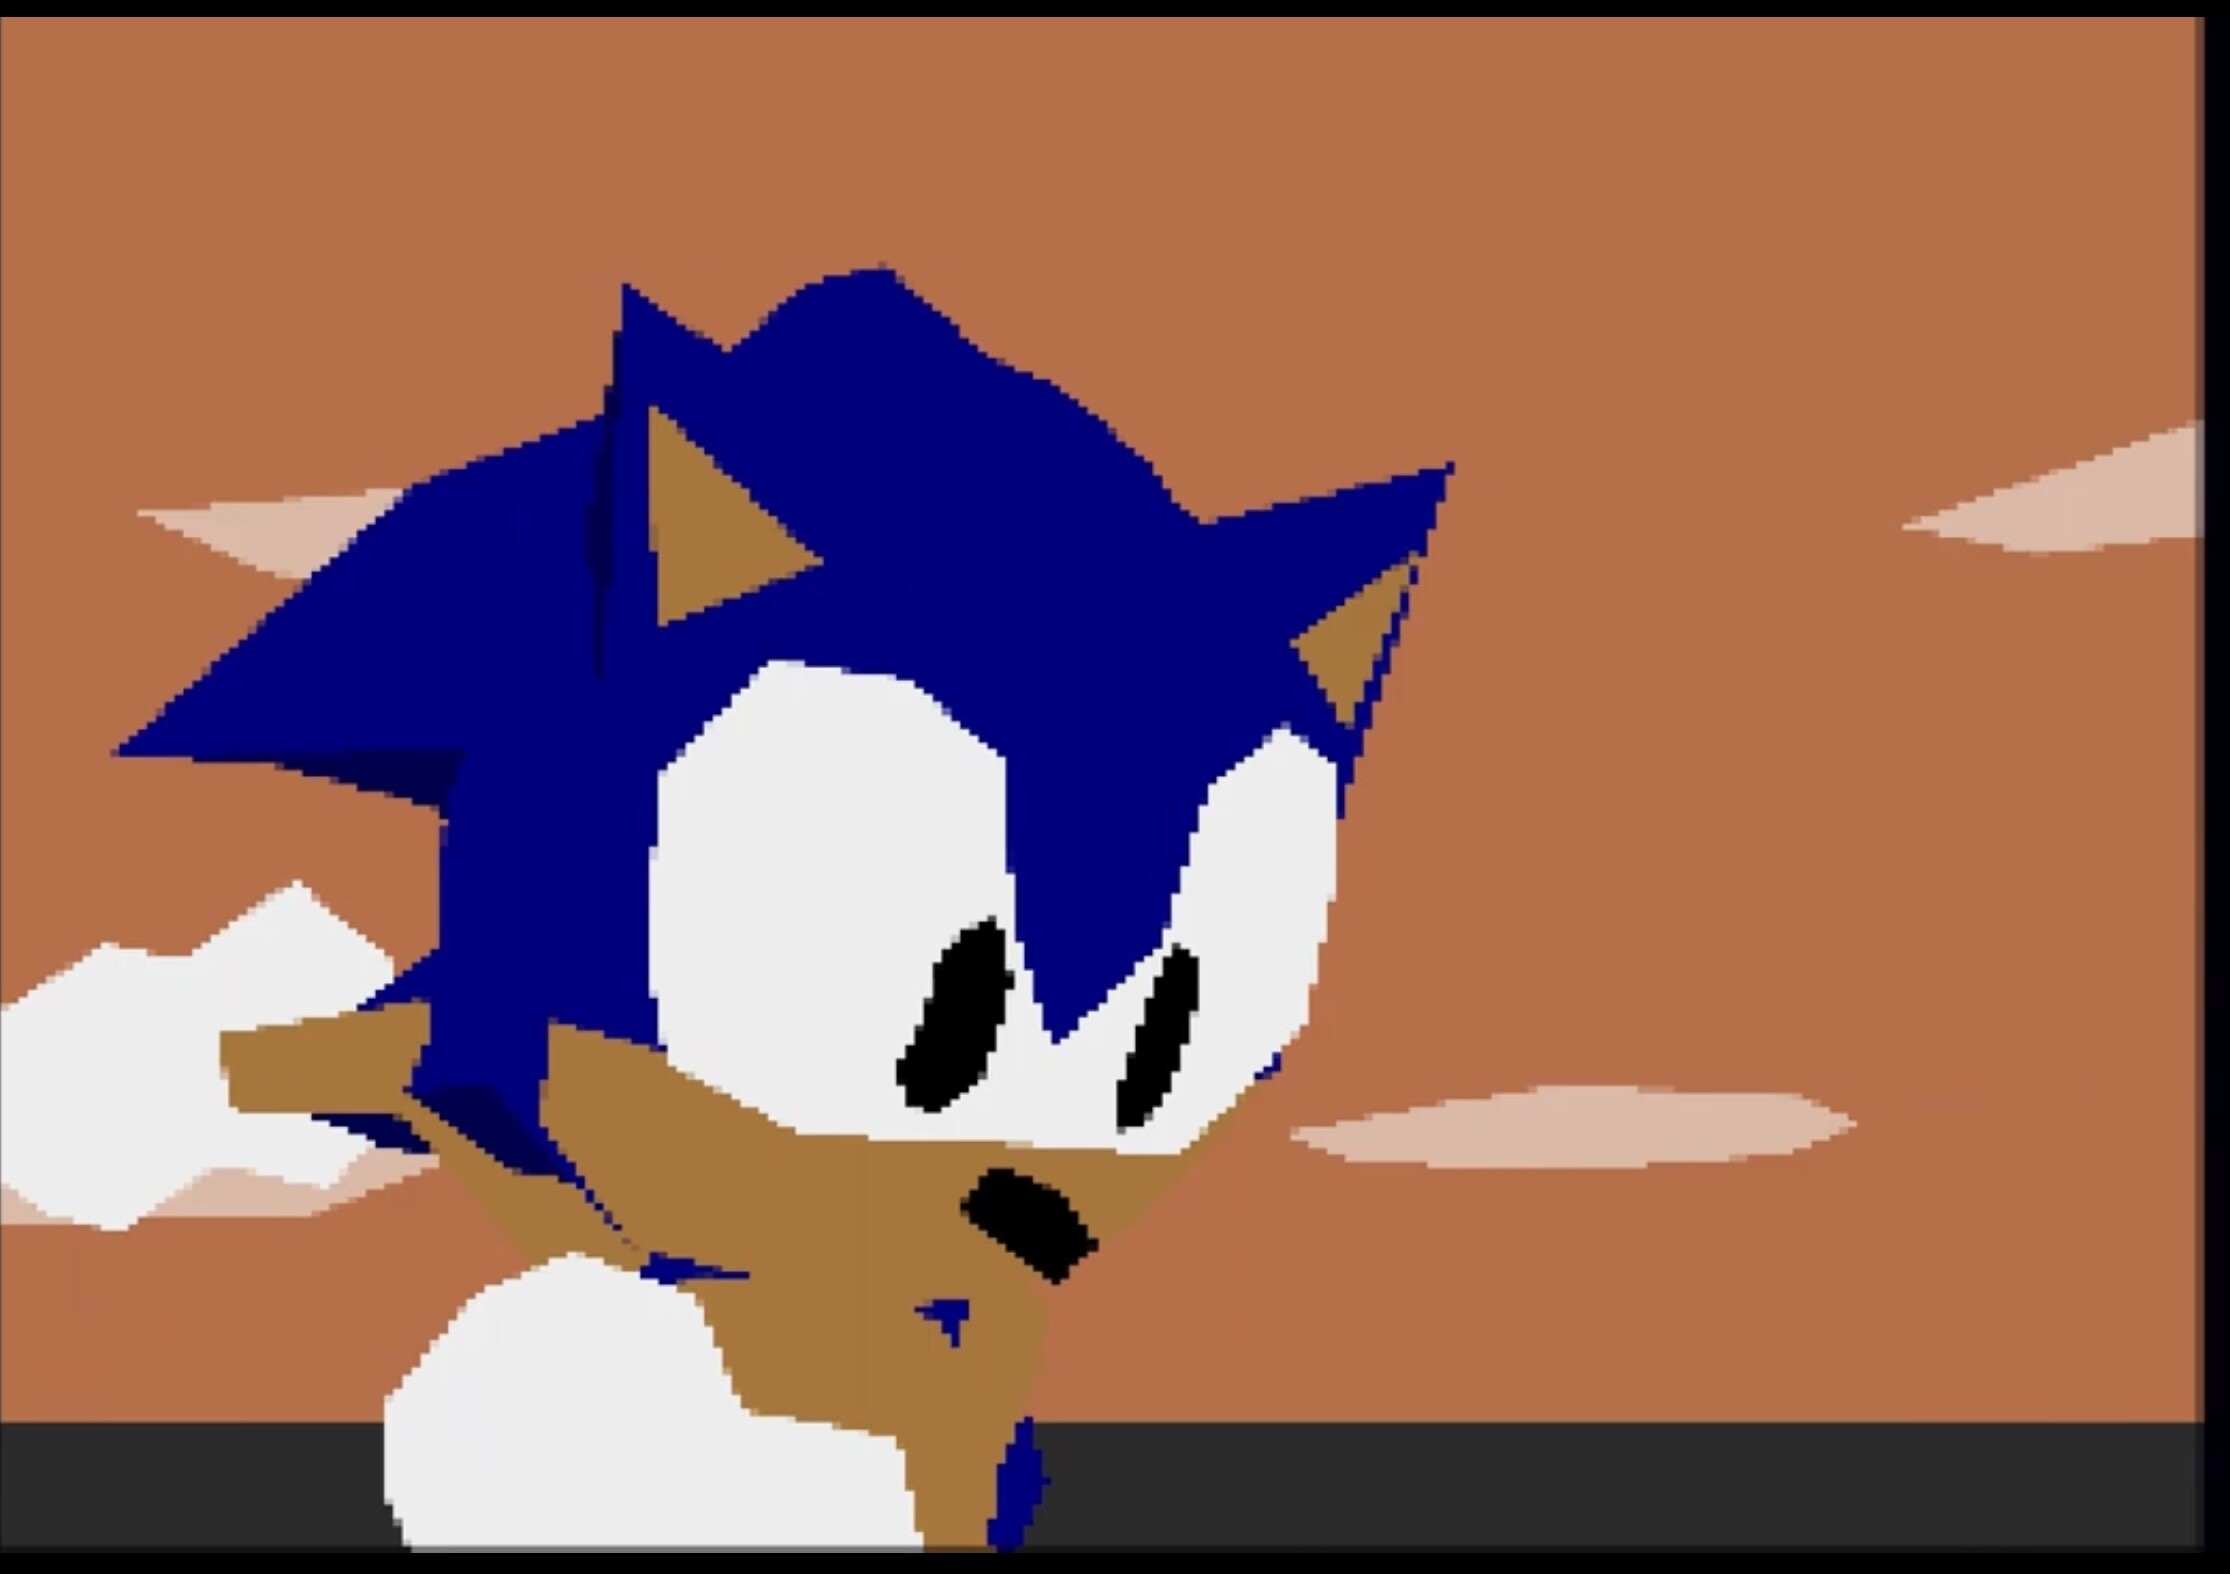 Sonic.exe Part 3: Dr. Eggman Checks Out (FINALE) on Make a GIF